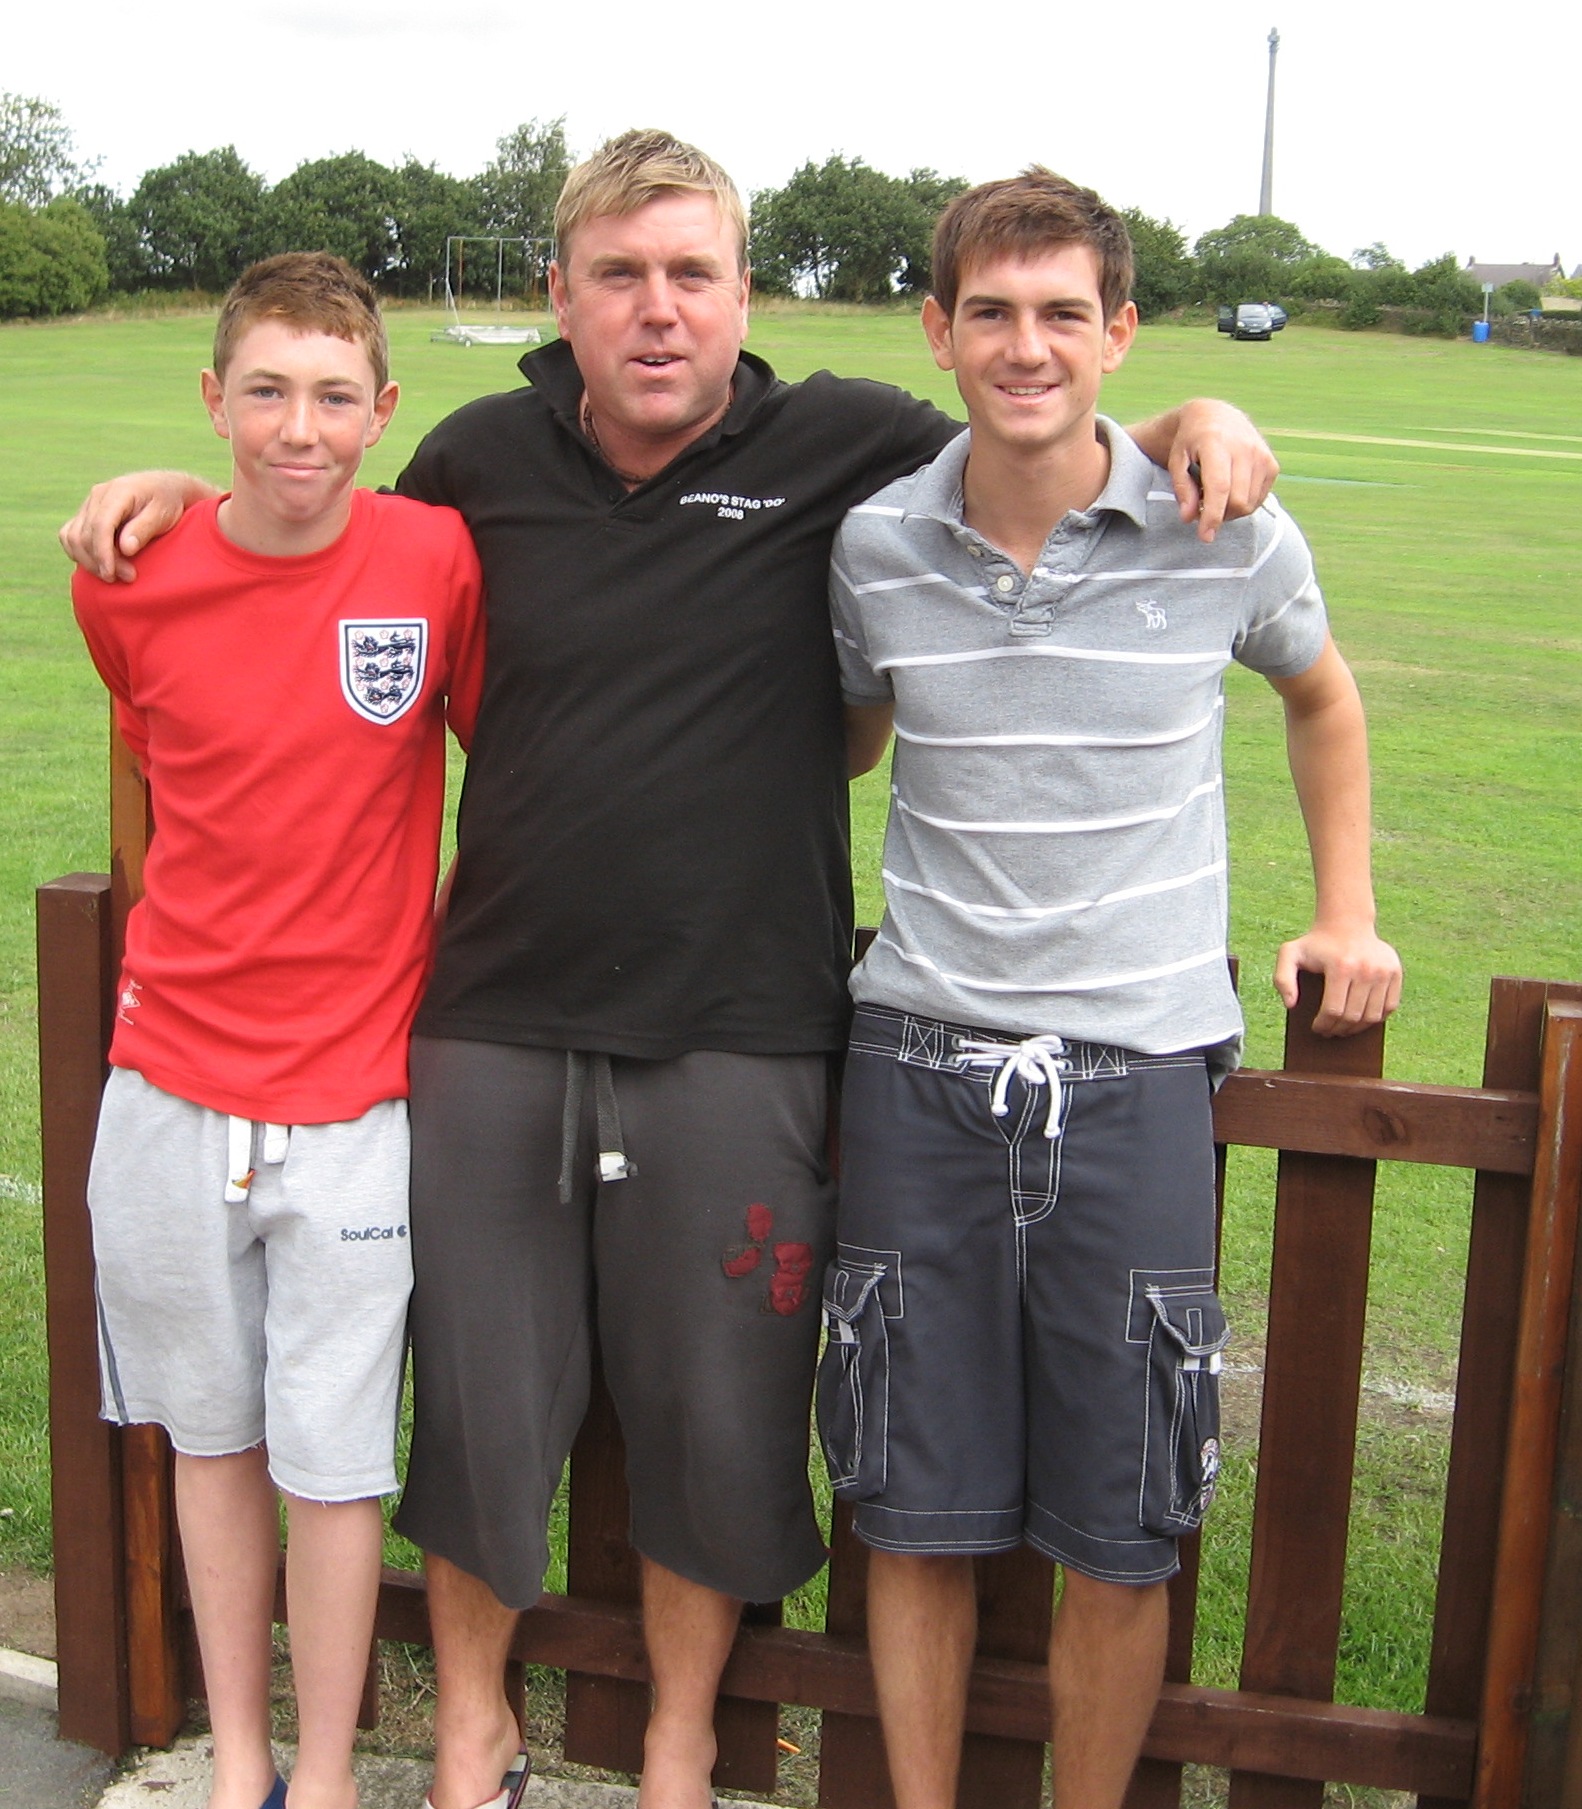 Dale with the Huddersfield youth